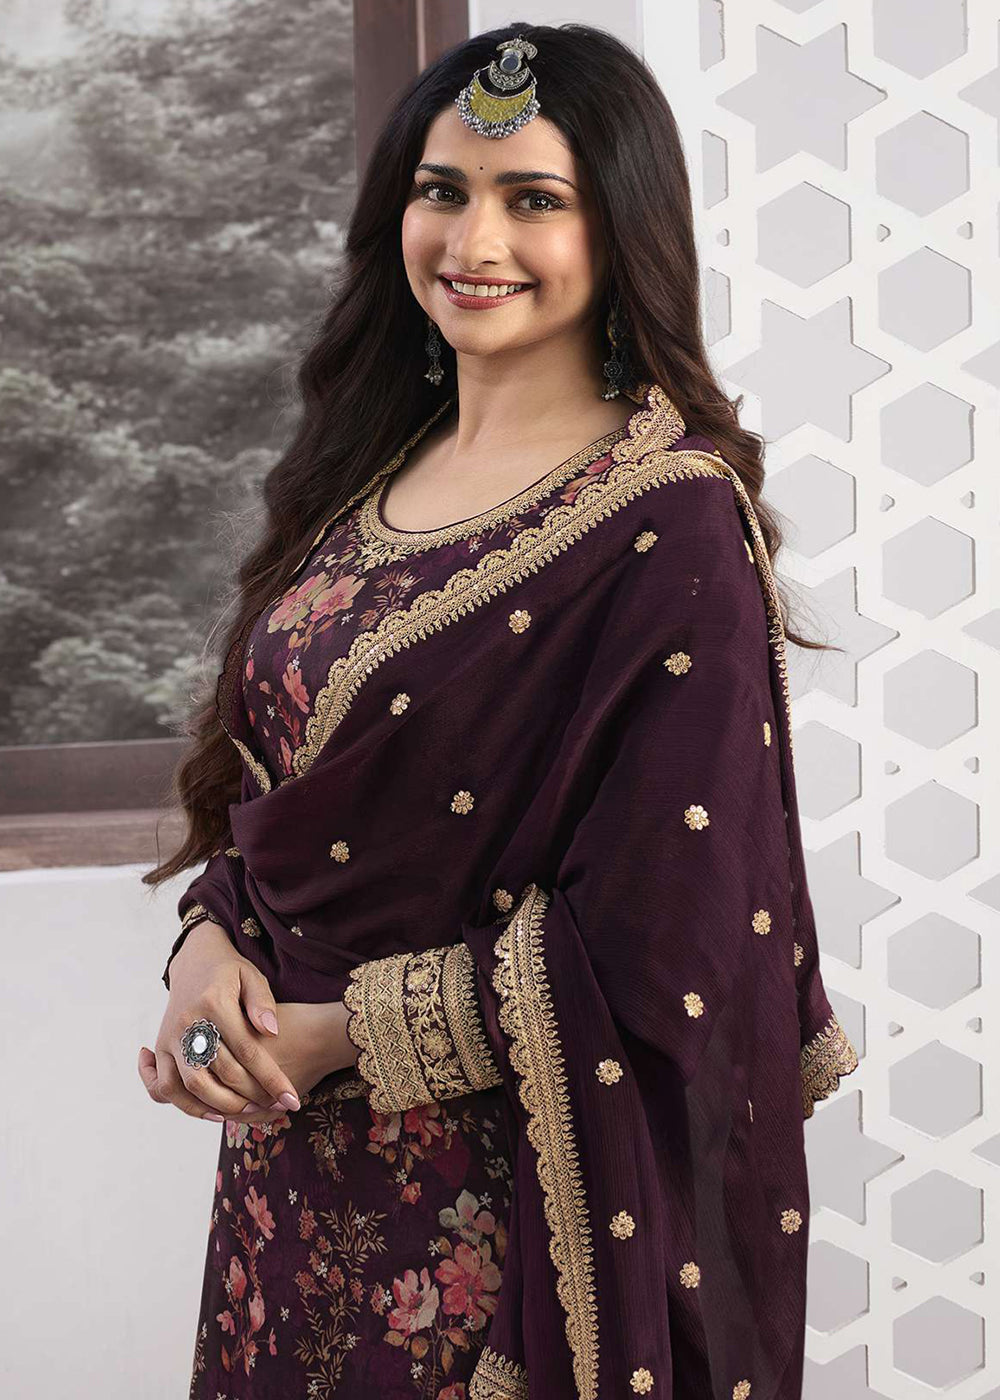 Shop Now Prachi Desai Wine Silk Georgette Embroidered Sharara Suit Online at Empress Clothing in USA, UK, Canada, Italy & Worldwide.